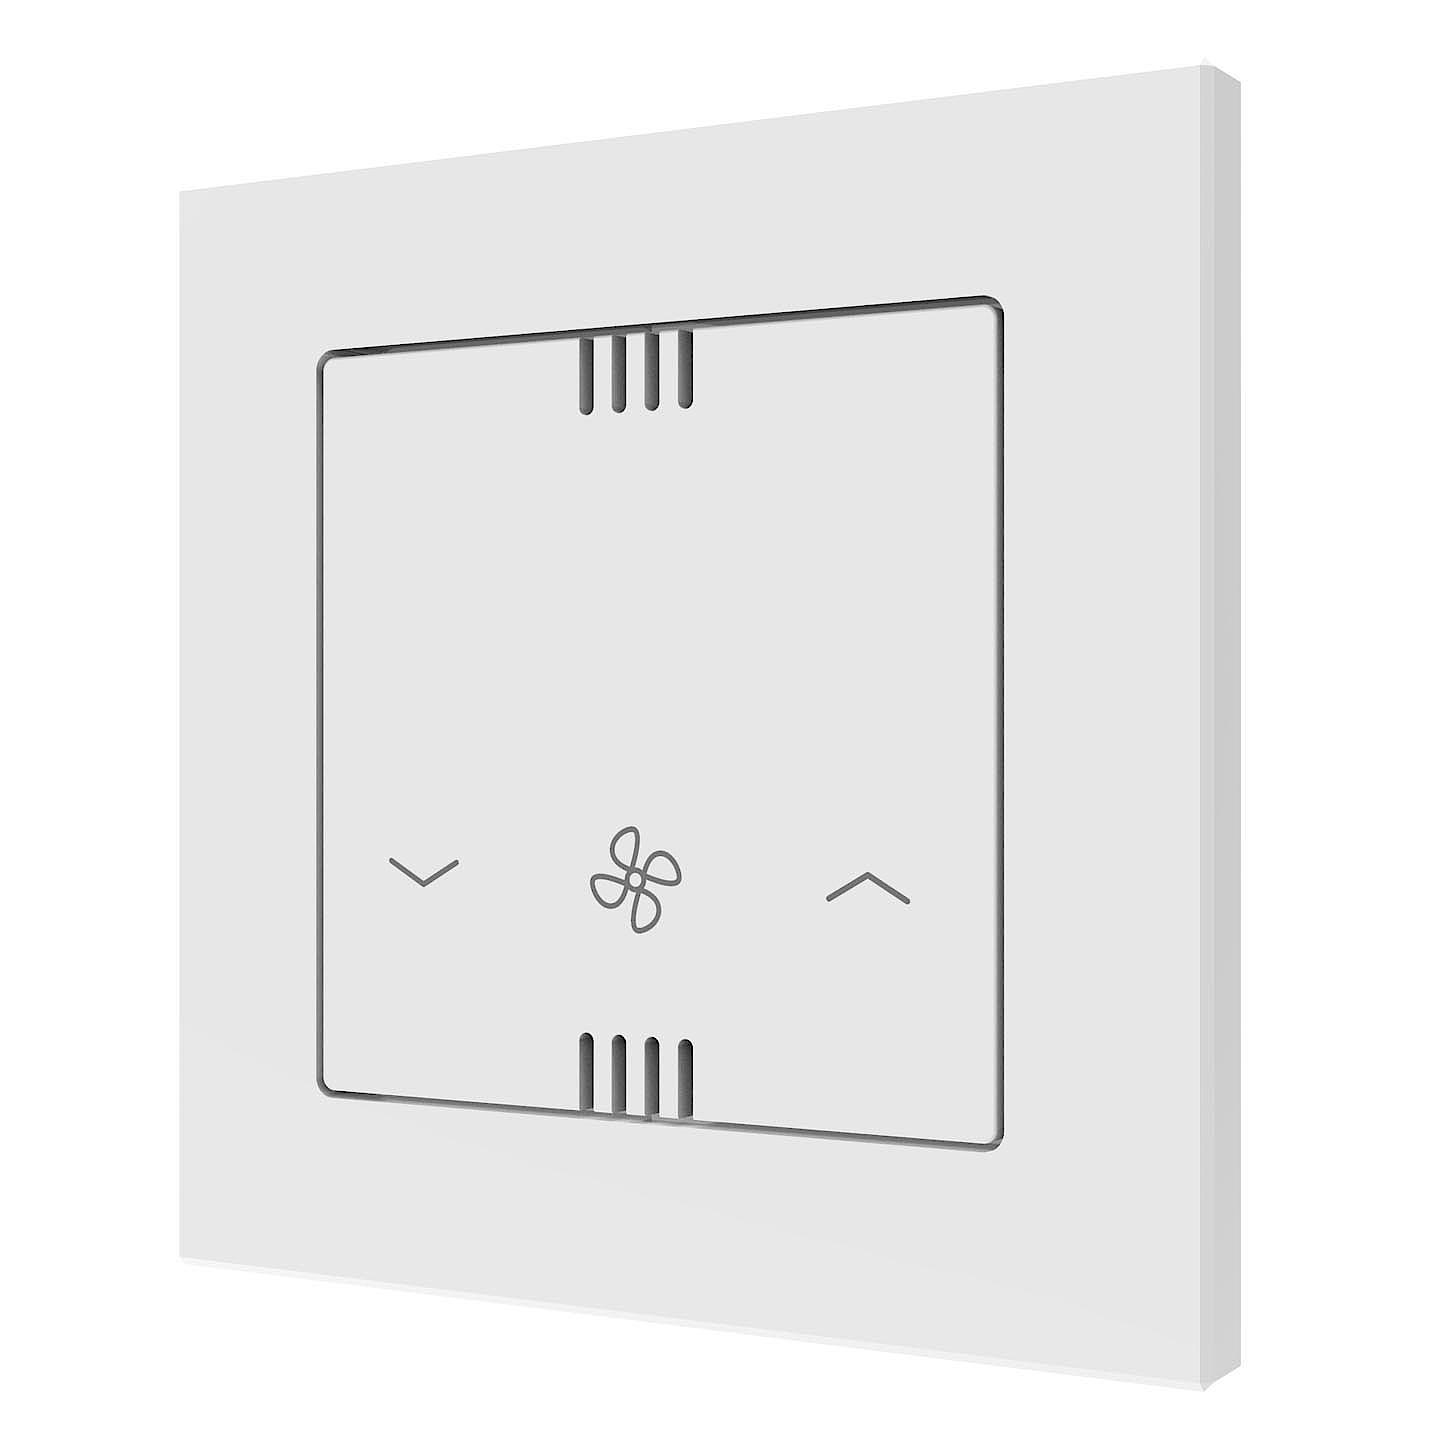 SmartControl operating element for the x-well decentralised residential ventilation system.